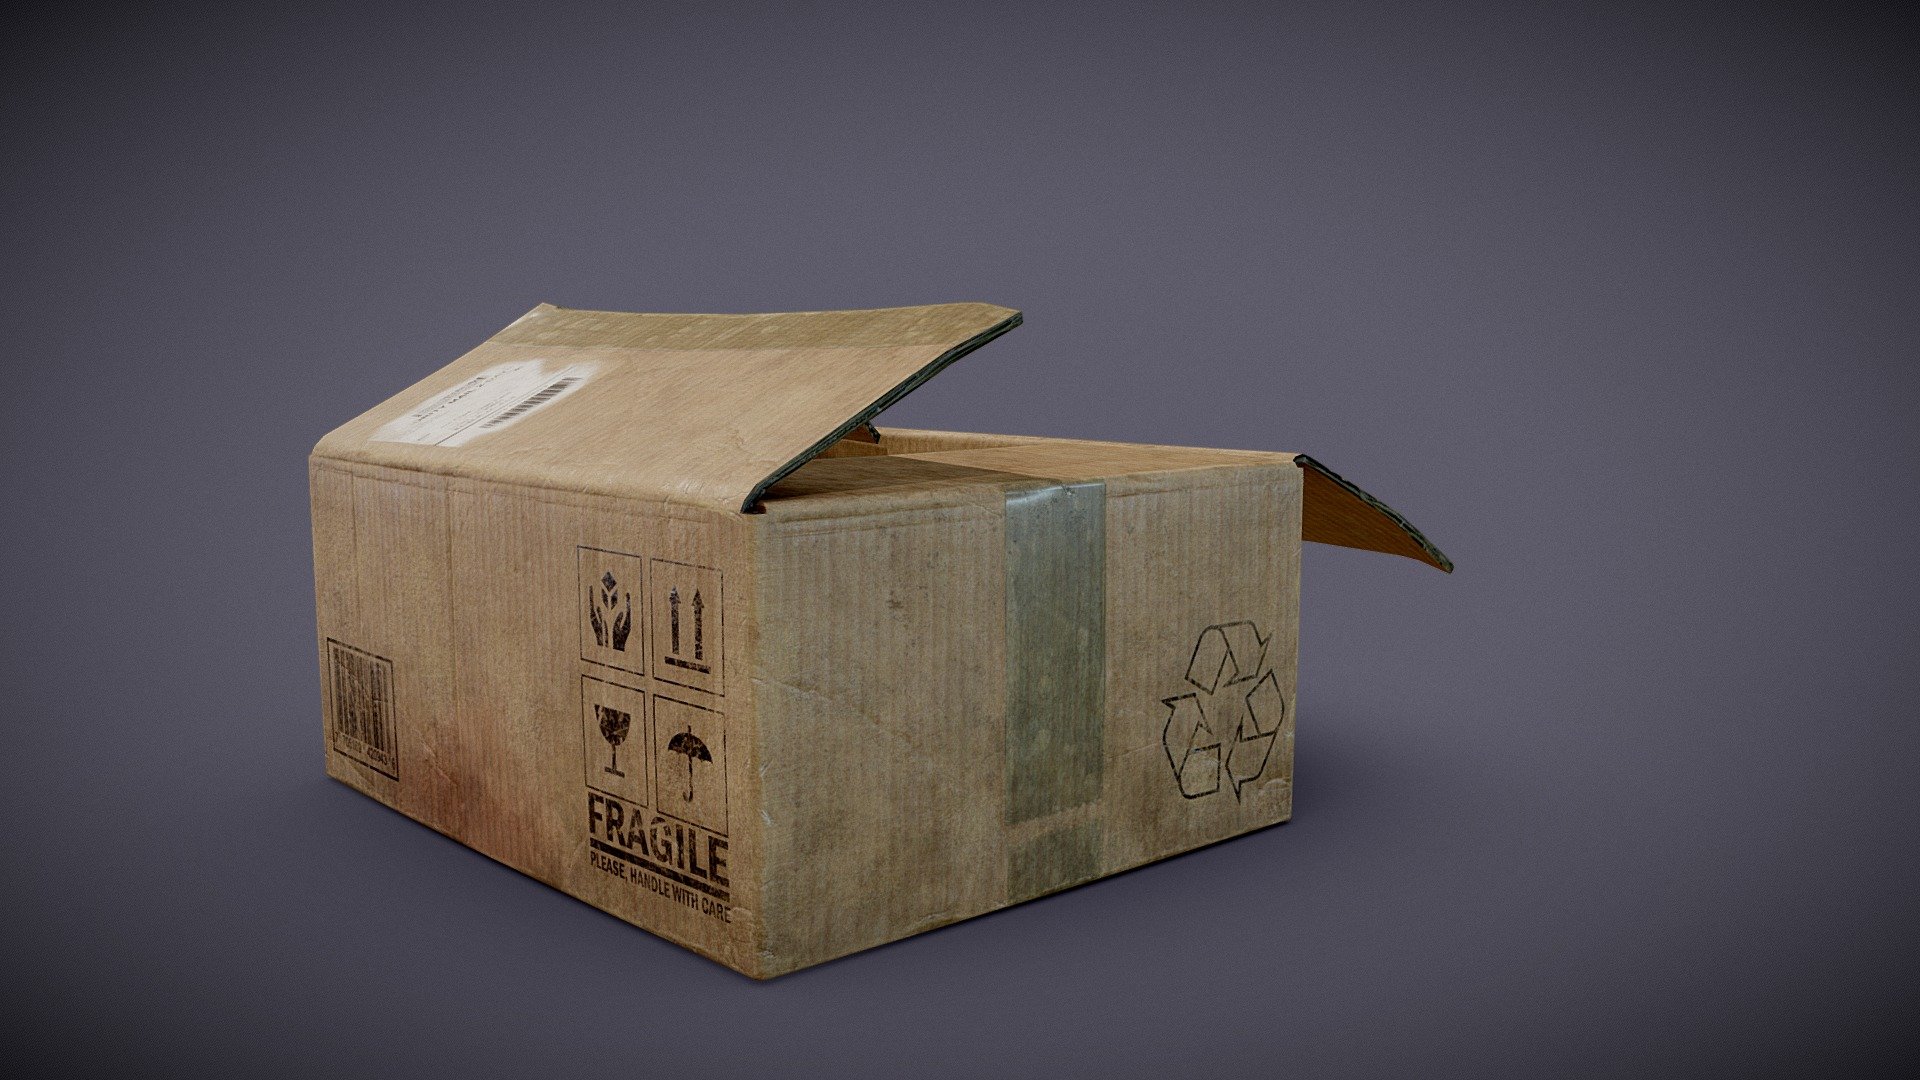 Free to everyone to use for anything. All I ask is that you consider me for your projects! 
You can contact me at artdmitriyk@gmail.com - Cardboard Box - Download Free 3D model by Dmitriy Korotkov (@ArtDmitriyK) 3d model